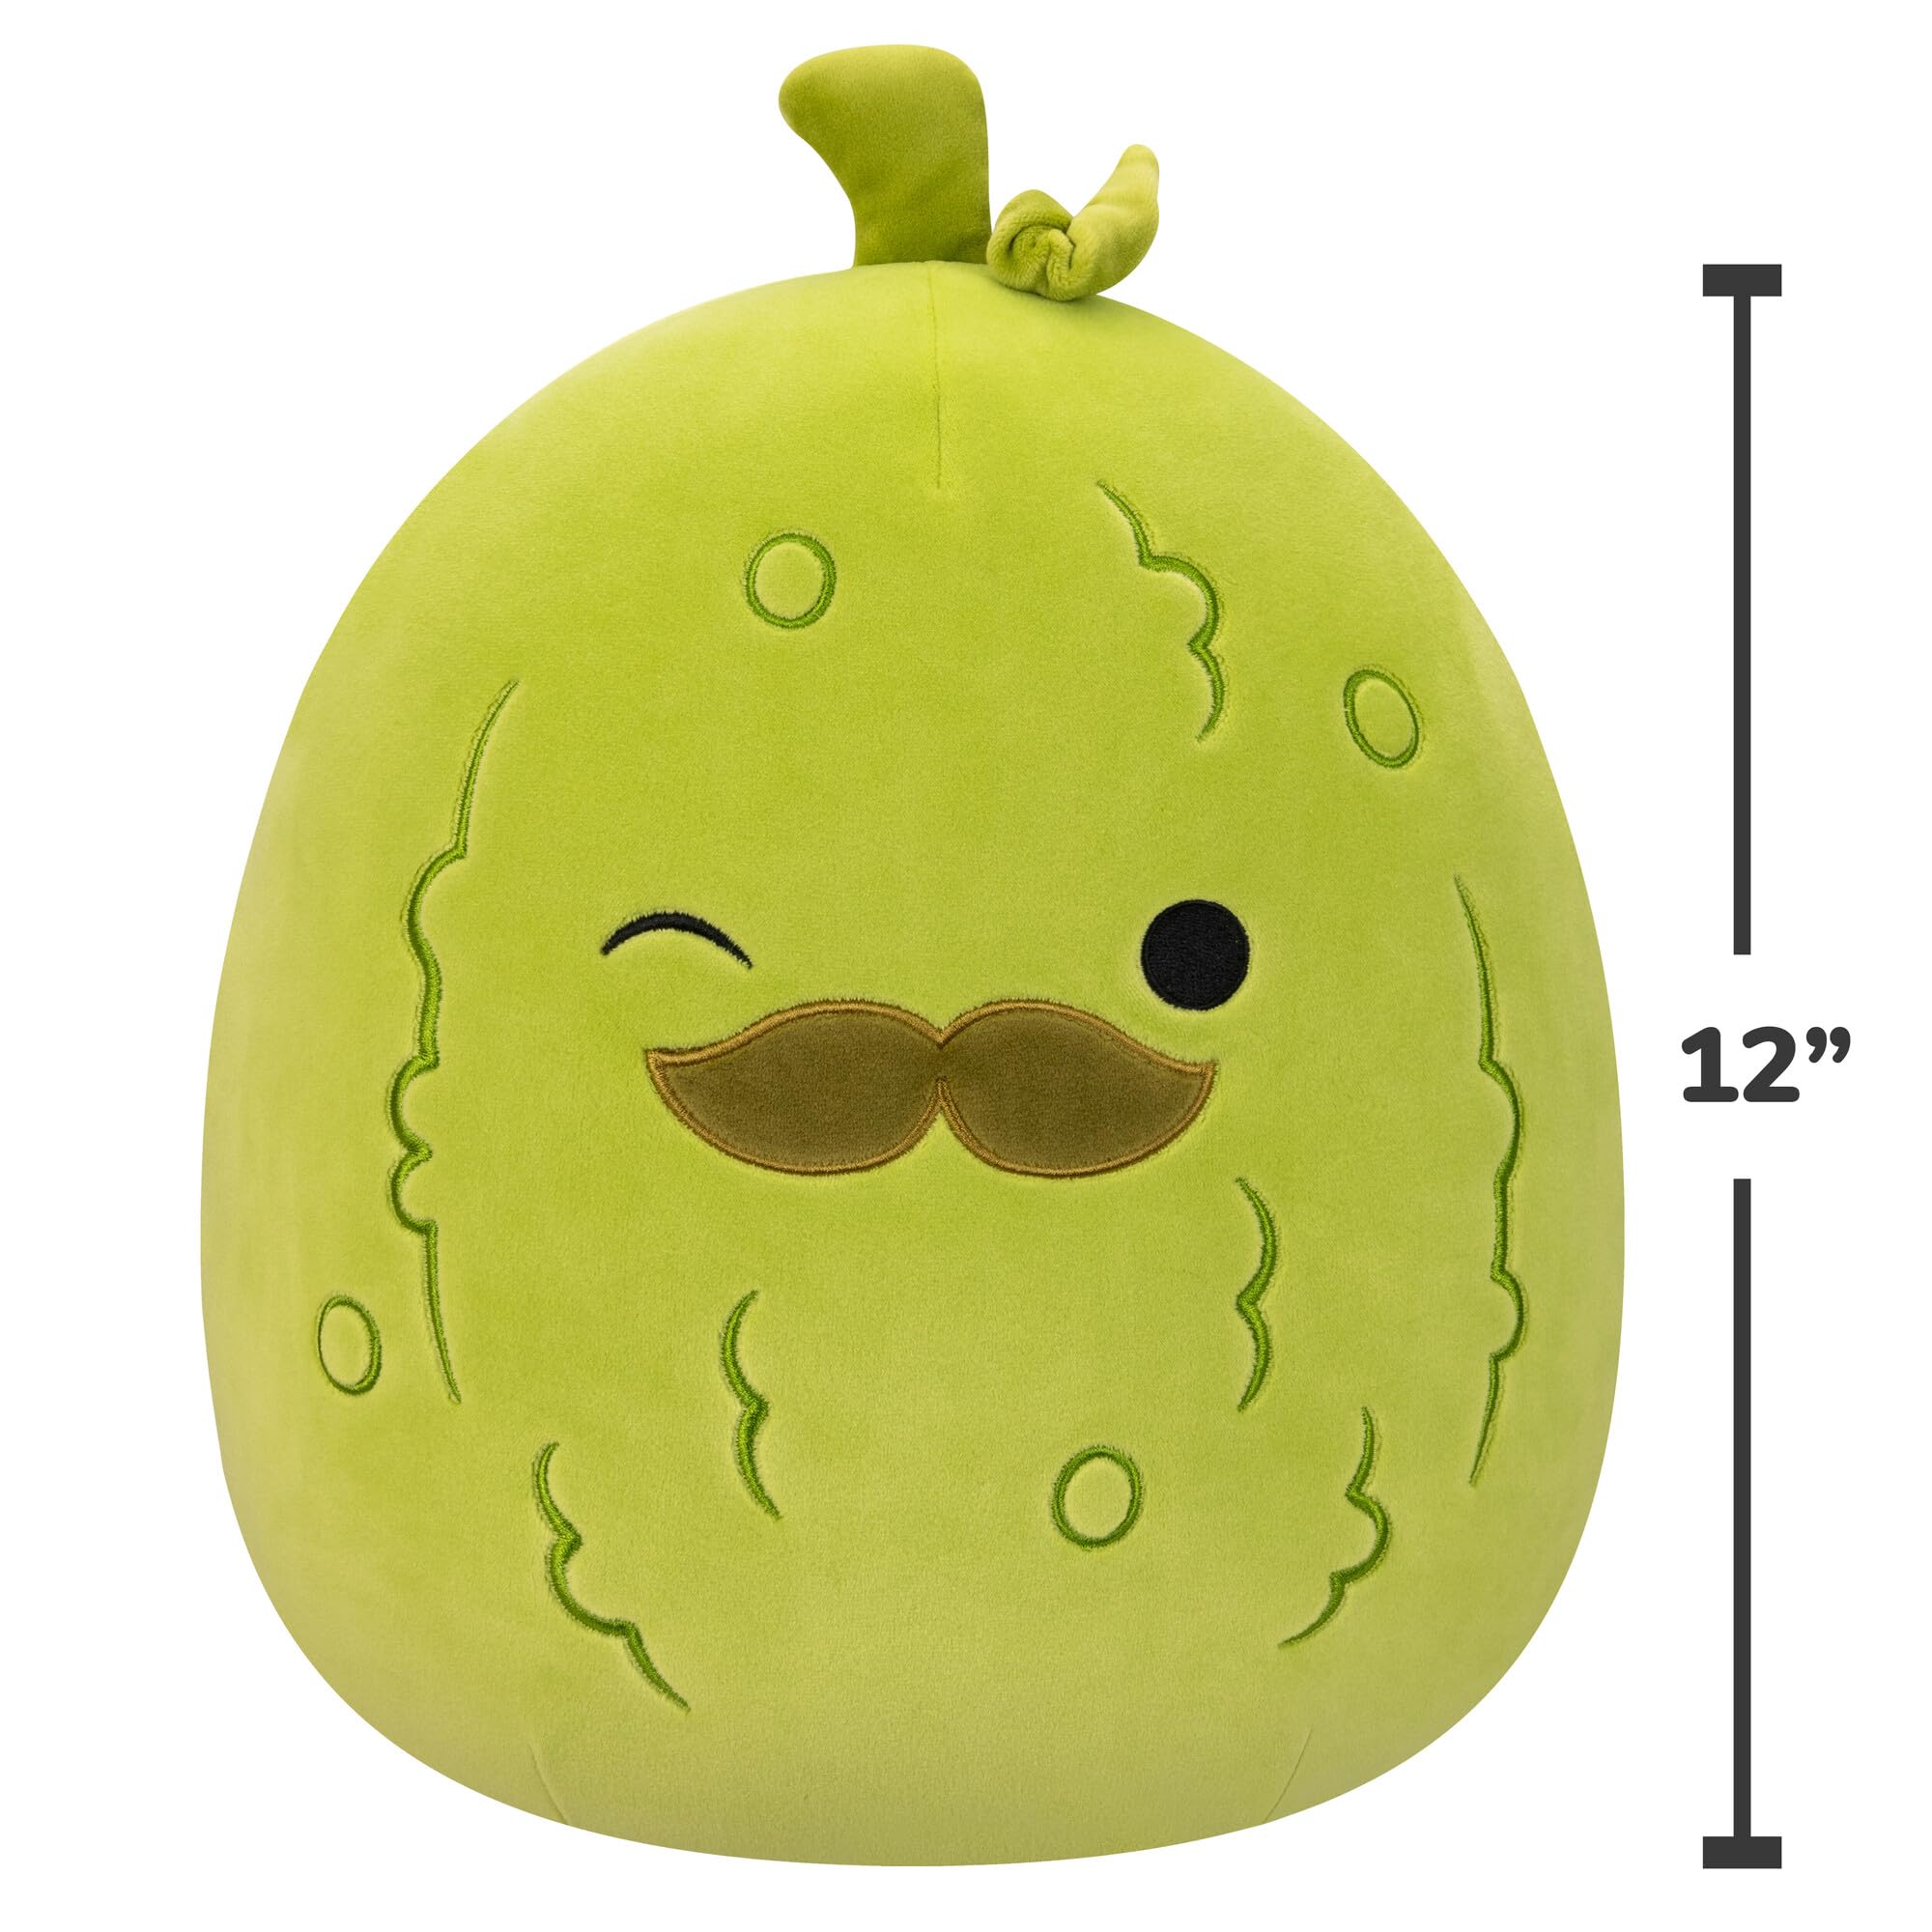 Squishmallows Original 12-Inch Charles Pickle with Mustache - Medium-Sized Ultrasoft Official Jazwares Plush